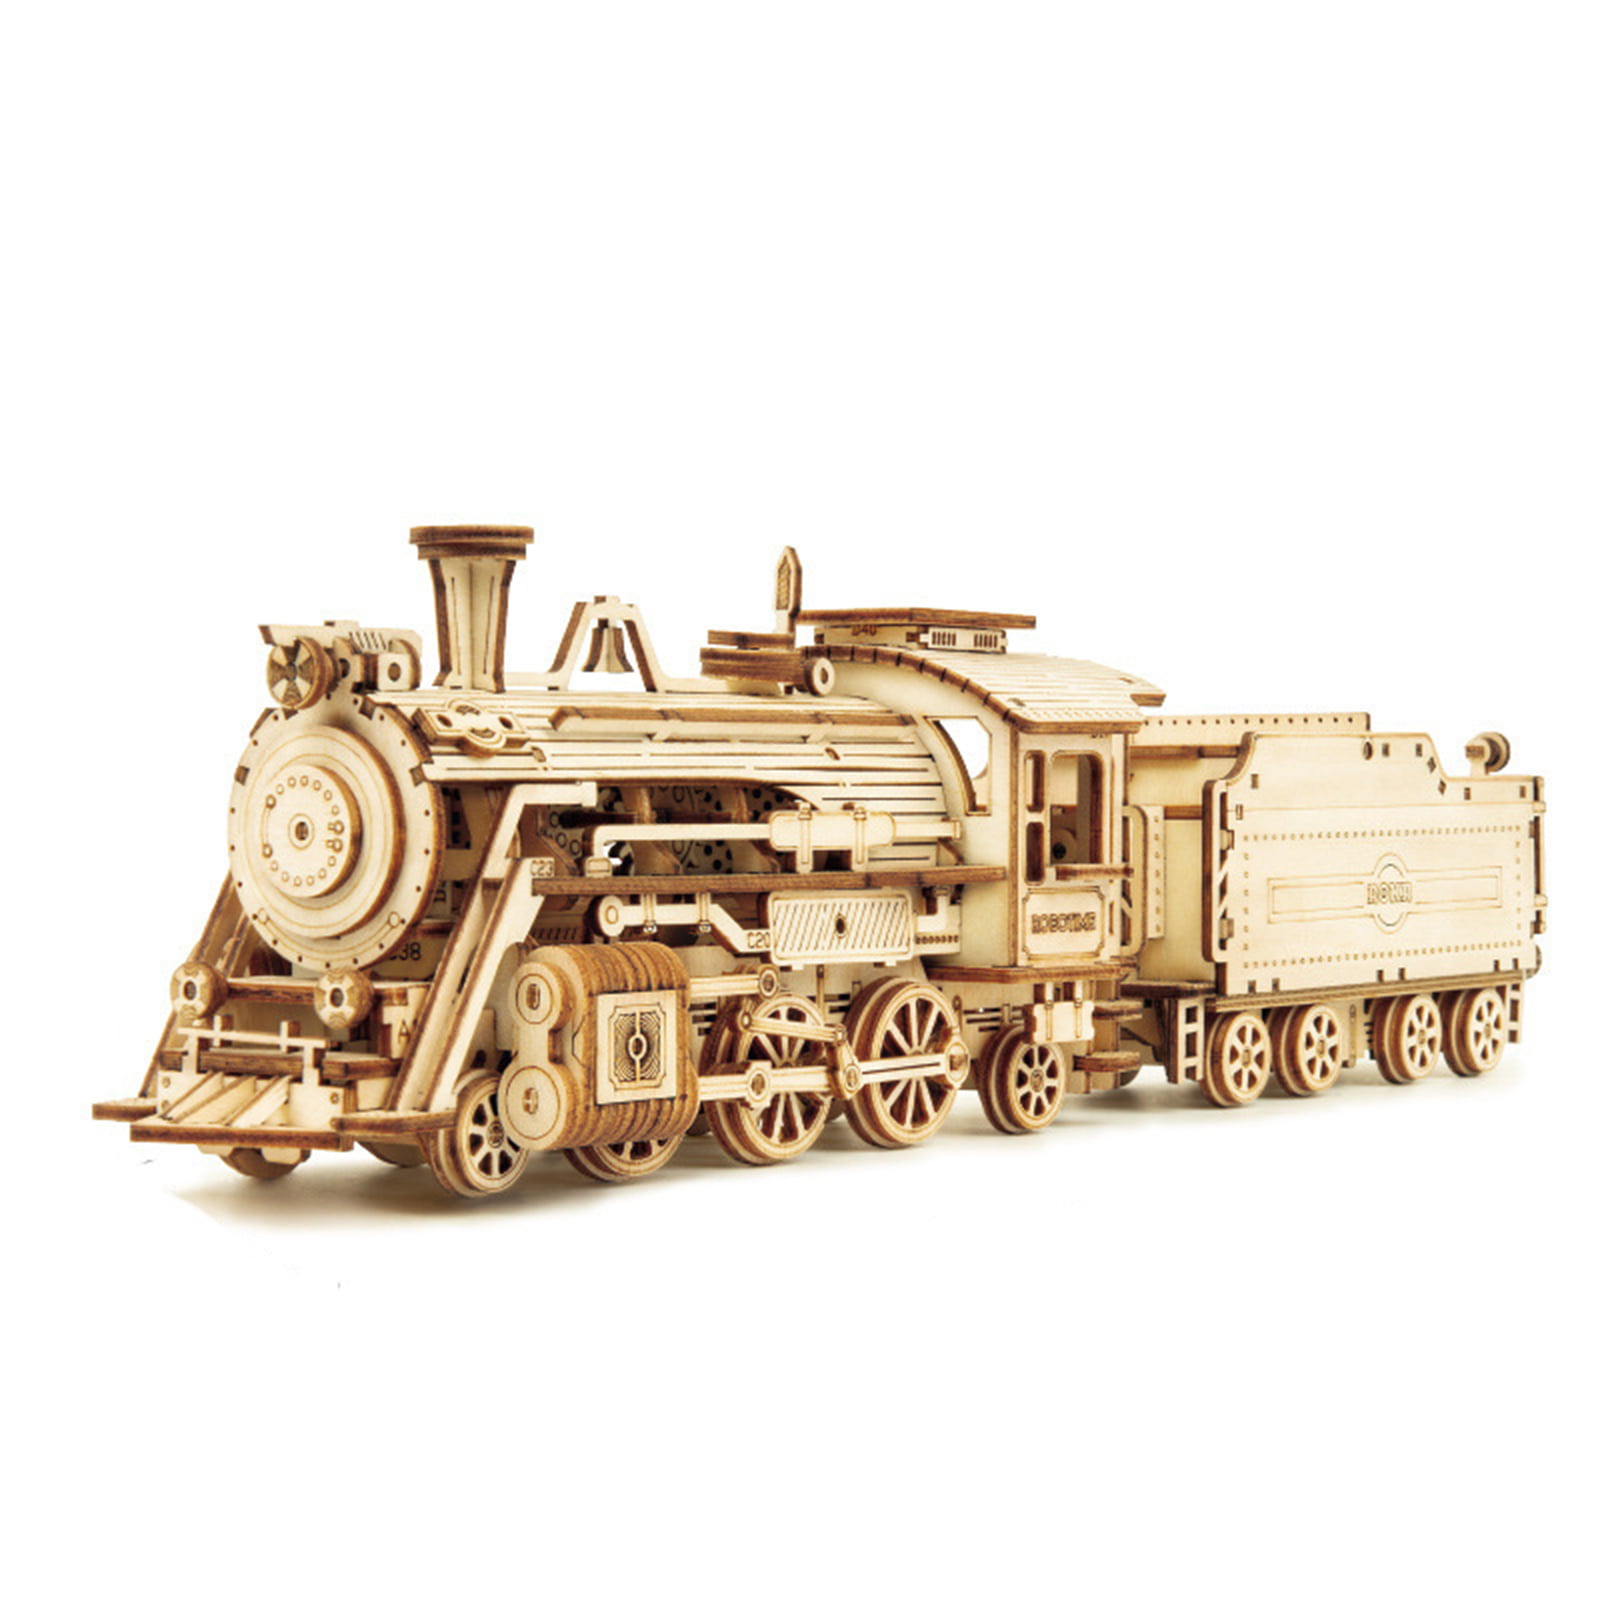 ROBOTIME 3D Assembly Wooden Puzzle Laser-Cut Locomotive Kit Mechanical Gears Toy Brain Teaser Games Best Birthday Gifts for Engineer Husband & Boyfriend & Teen Boys & Adults